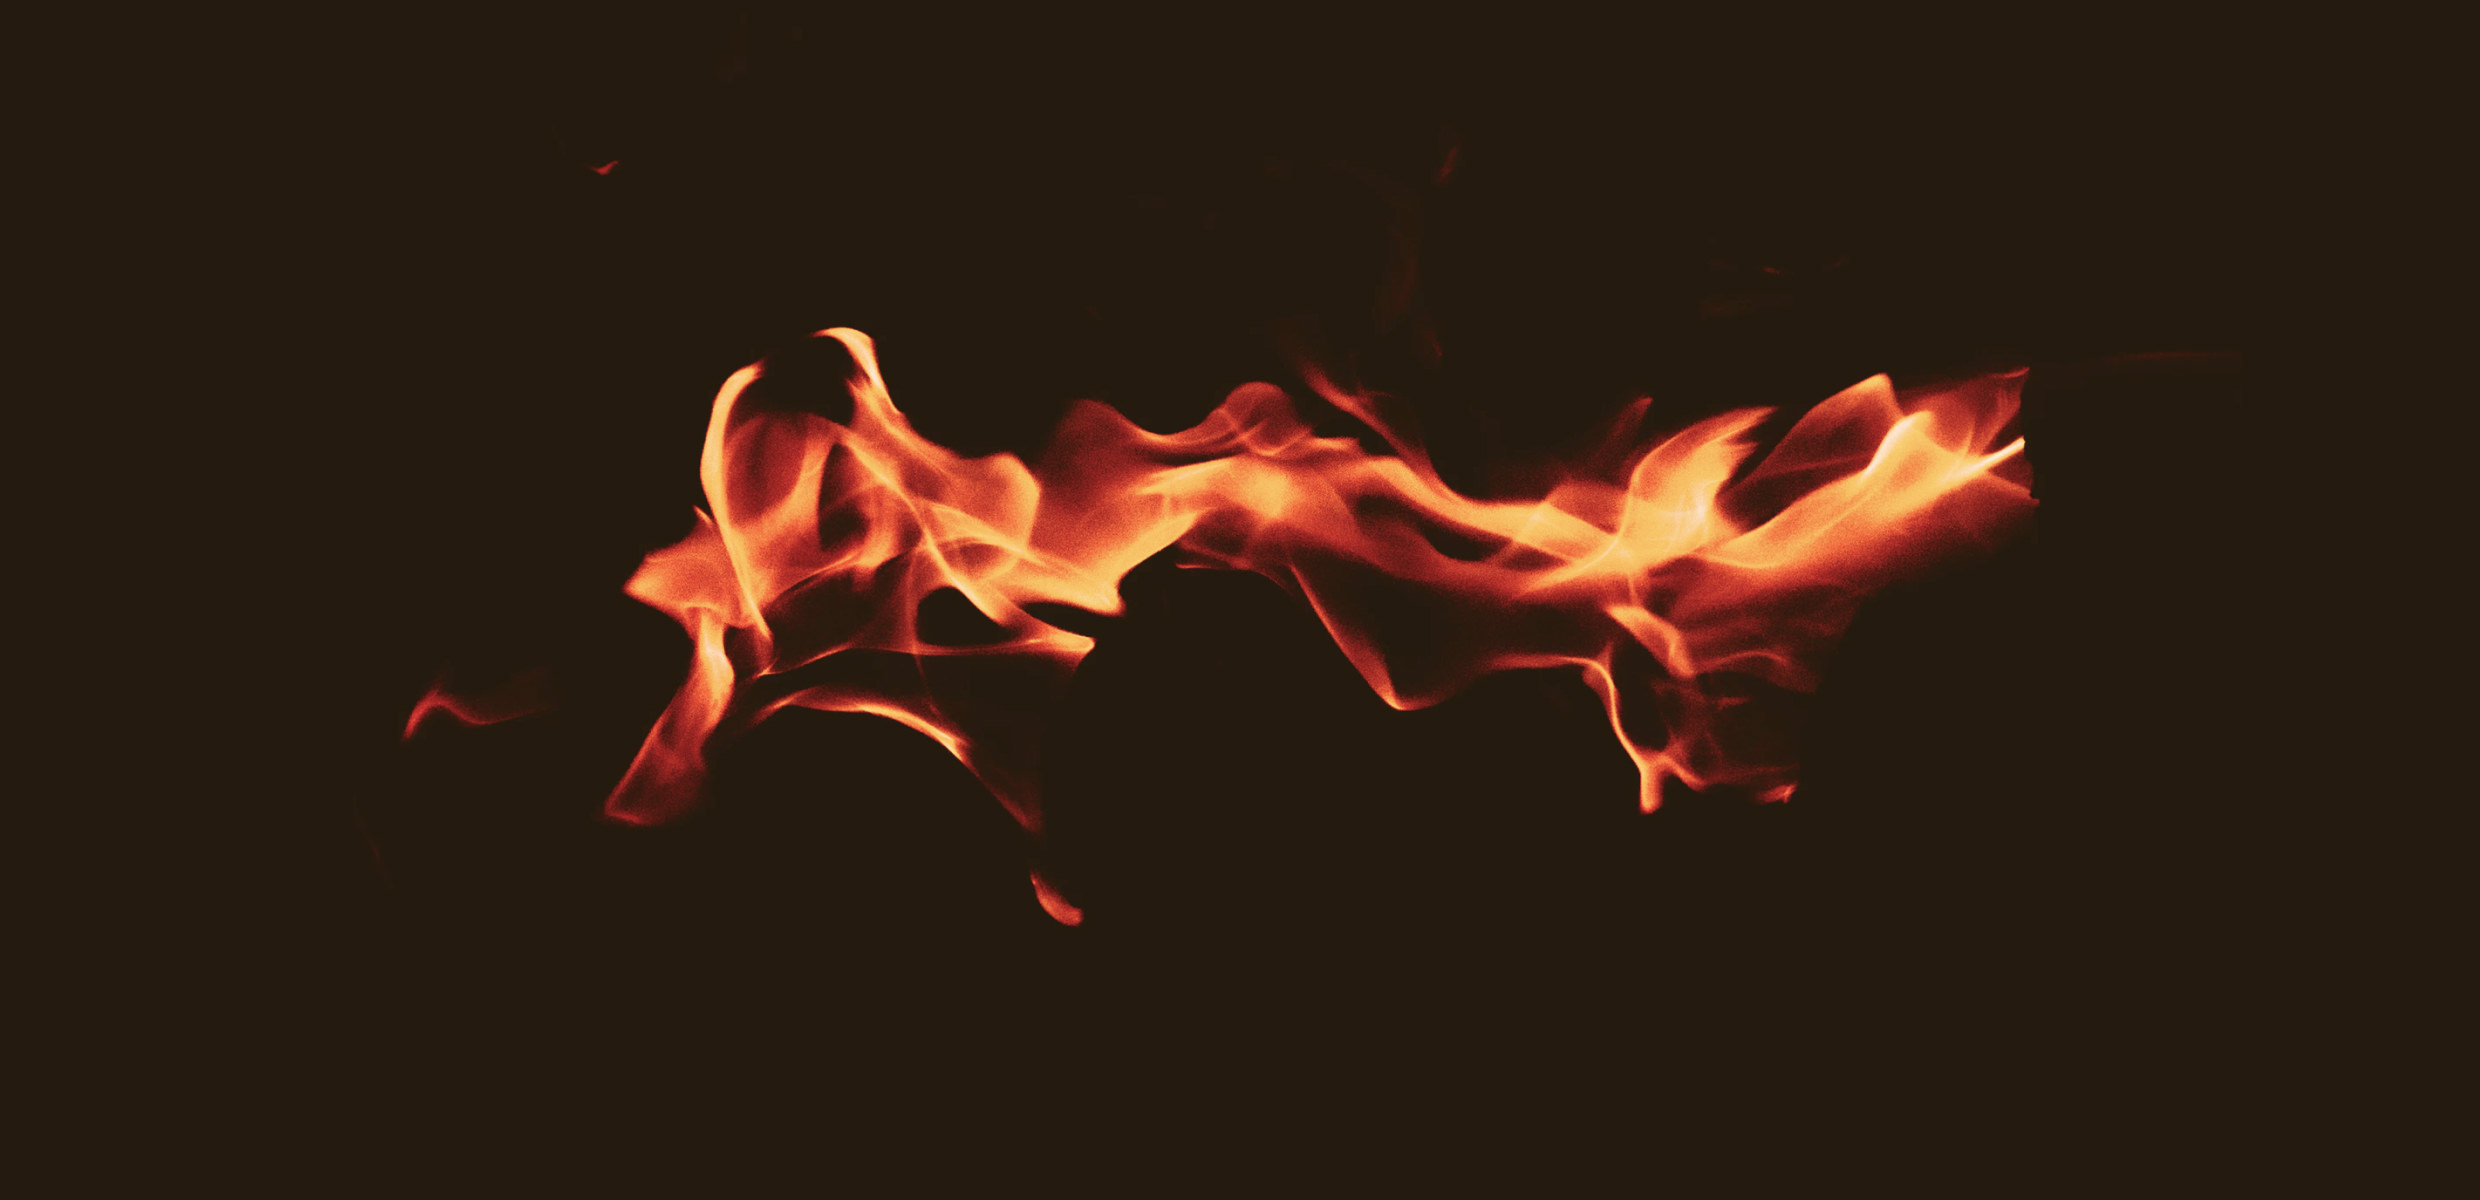 21 Eye-Catching Fire Video Effects to Heat Up Your Content - Motion Array